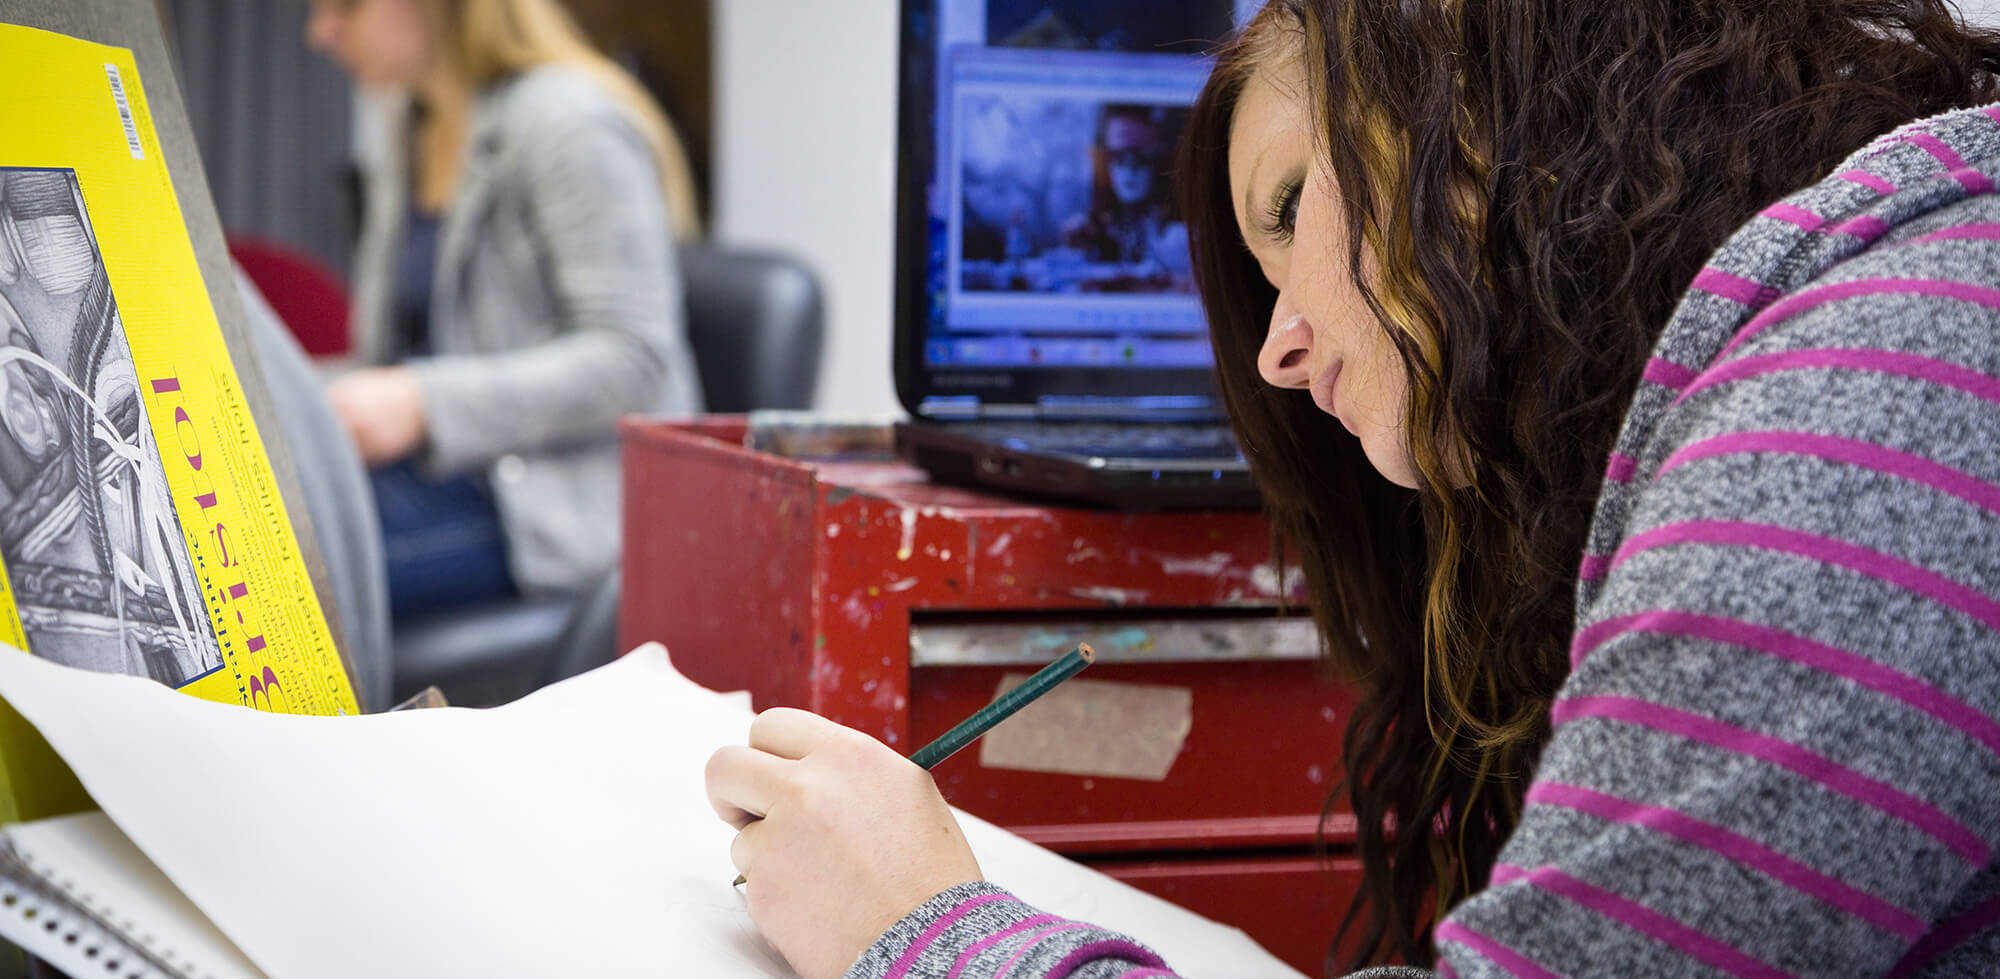 A female student focuses on drawing in a sketchbook